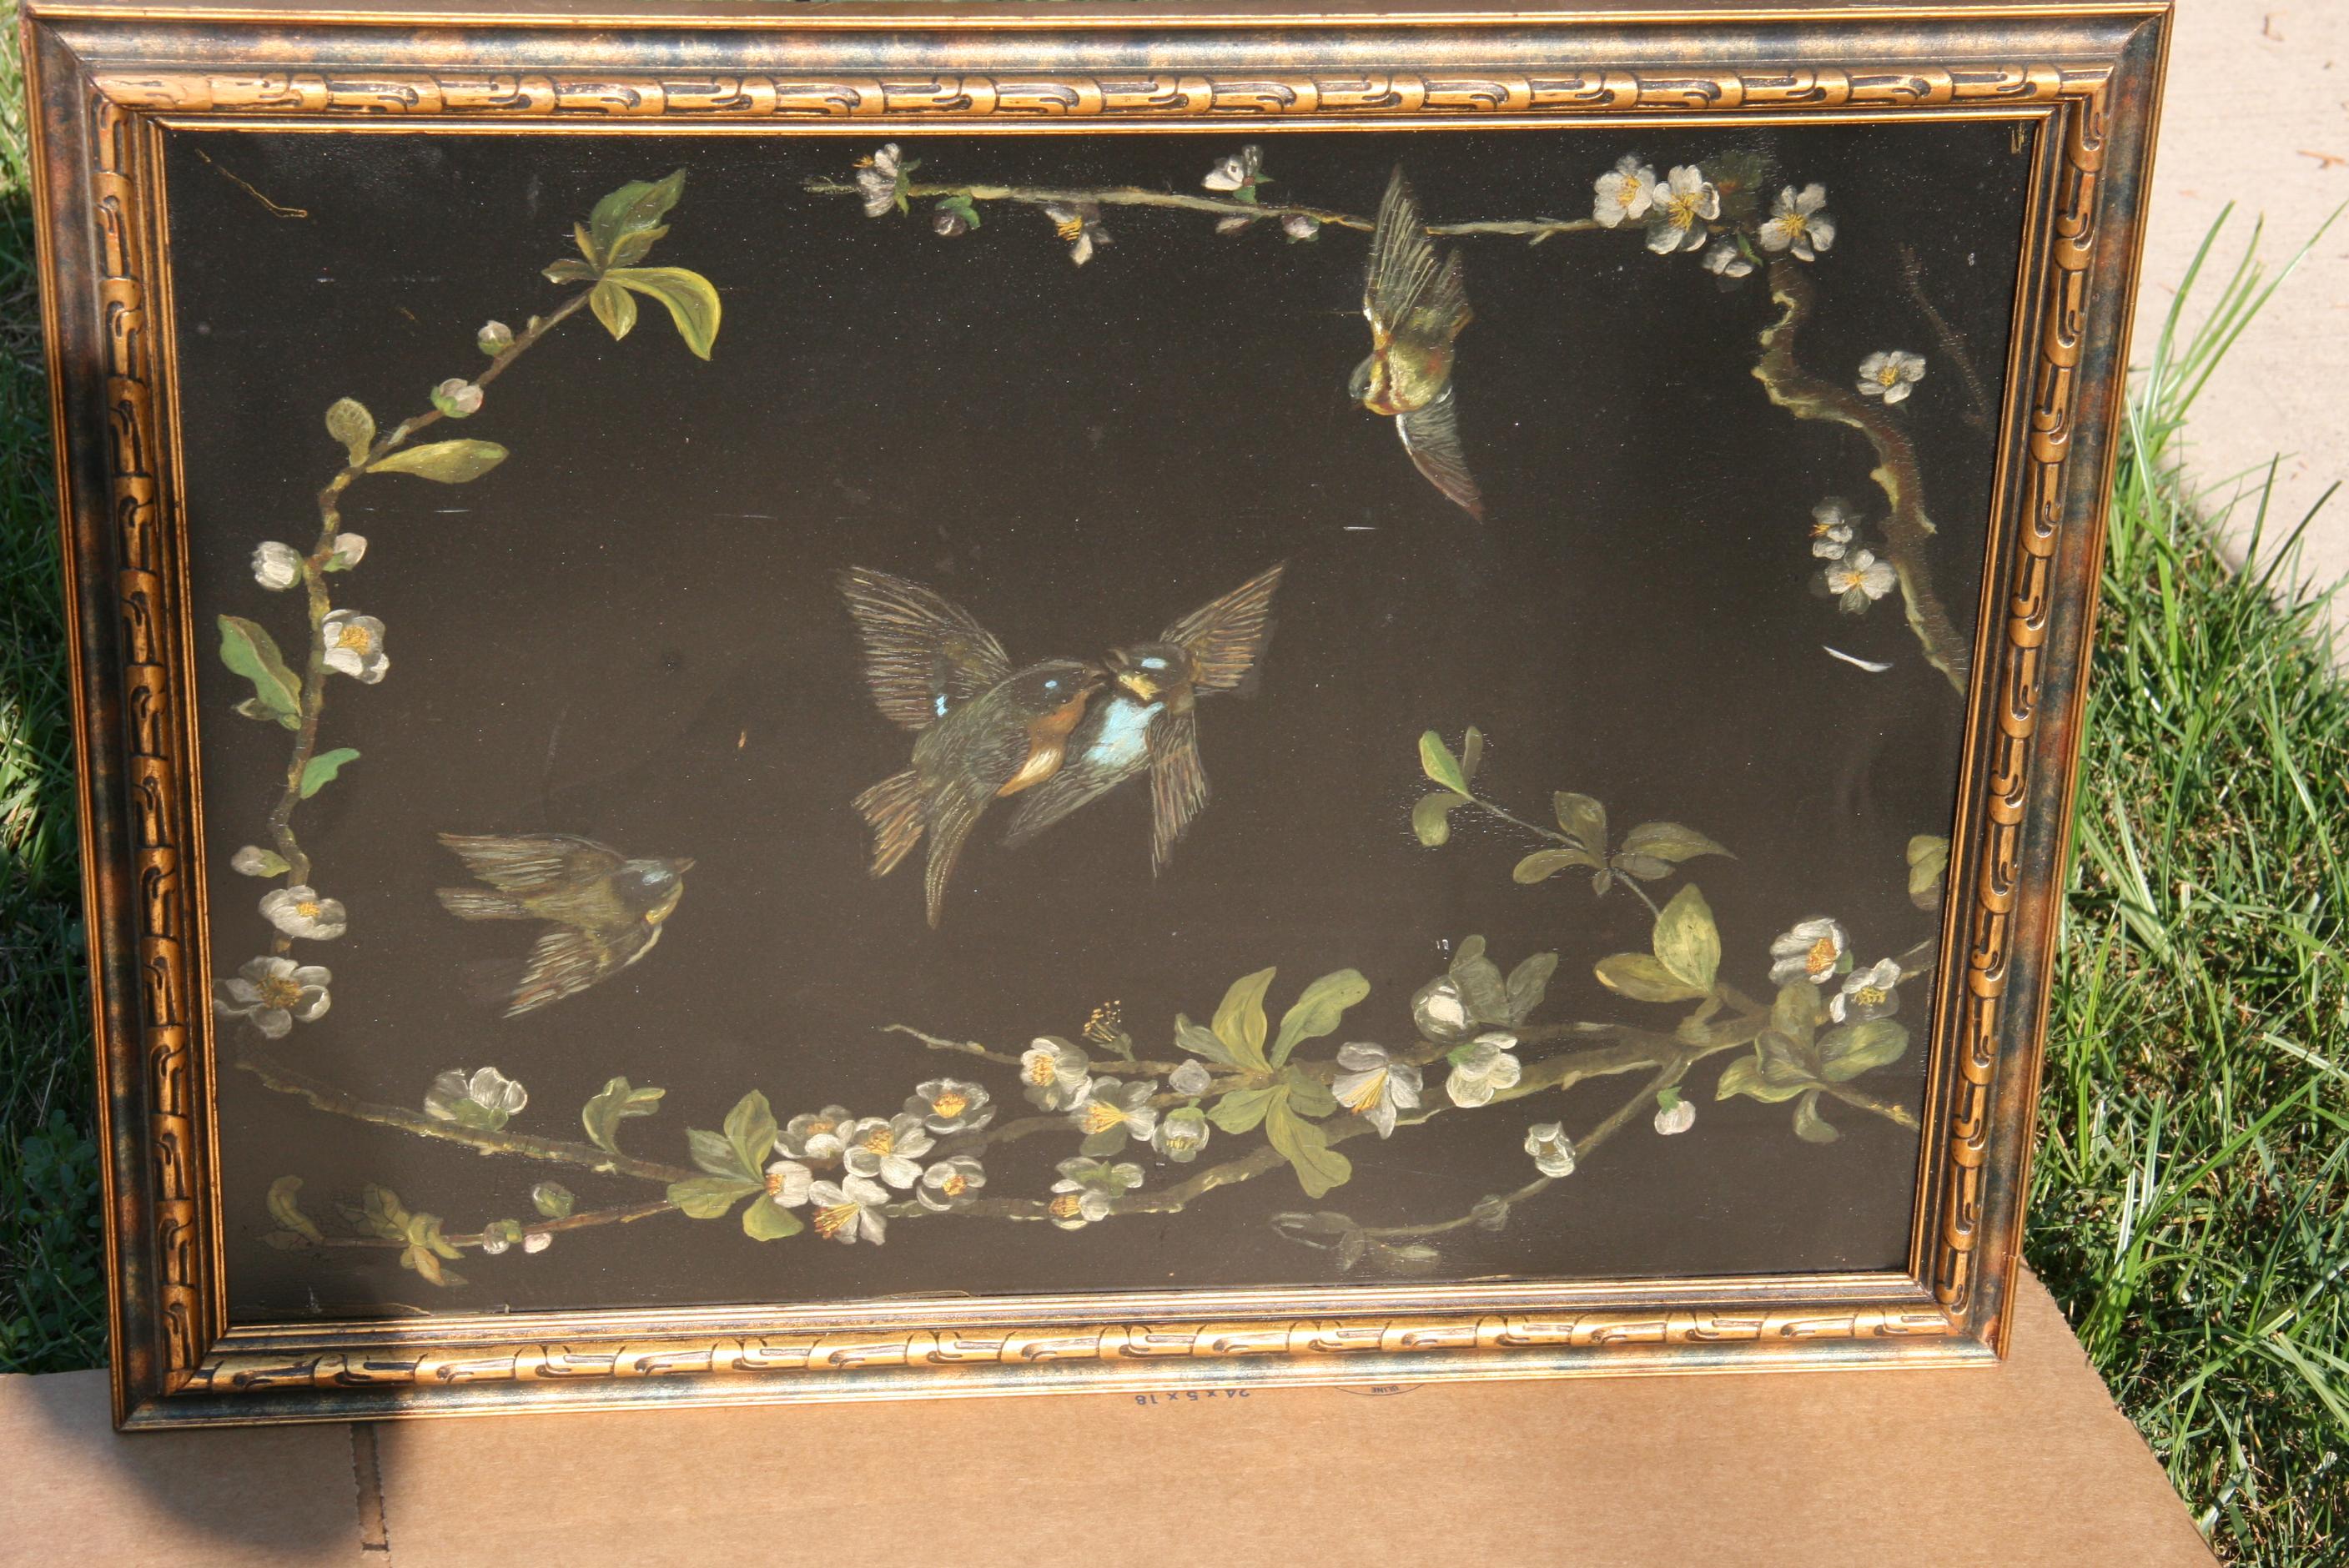 Victorian Birds and Flowers Oil Painting on Metal Panel circa 1890's - Black Landscape Painting by Unknown